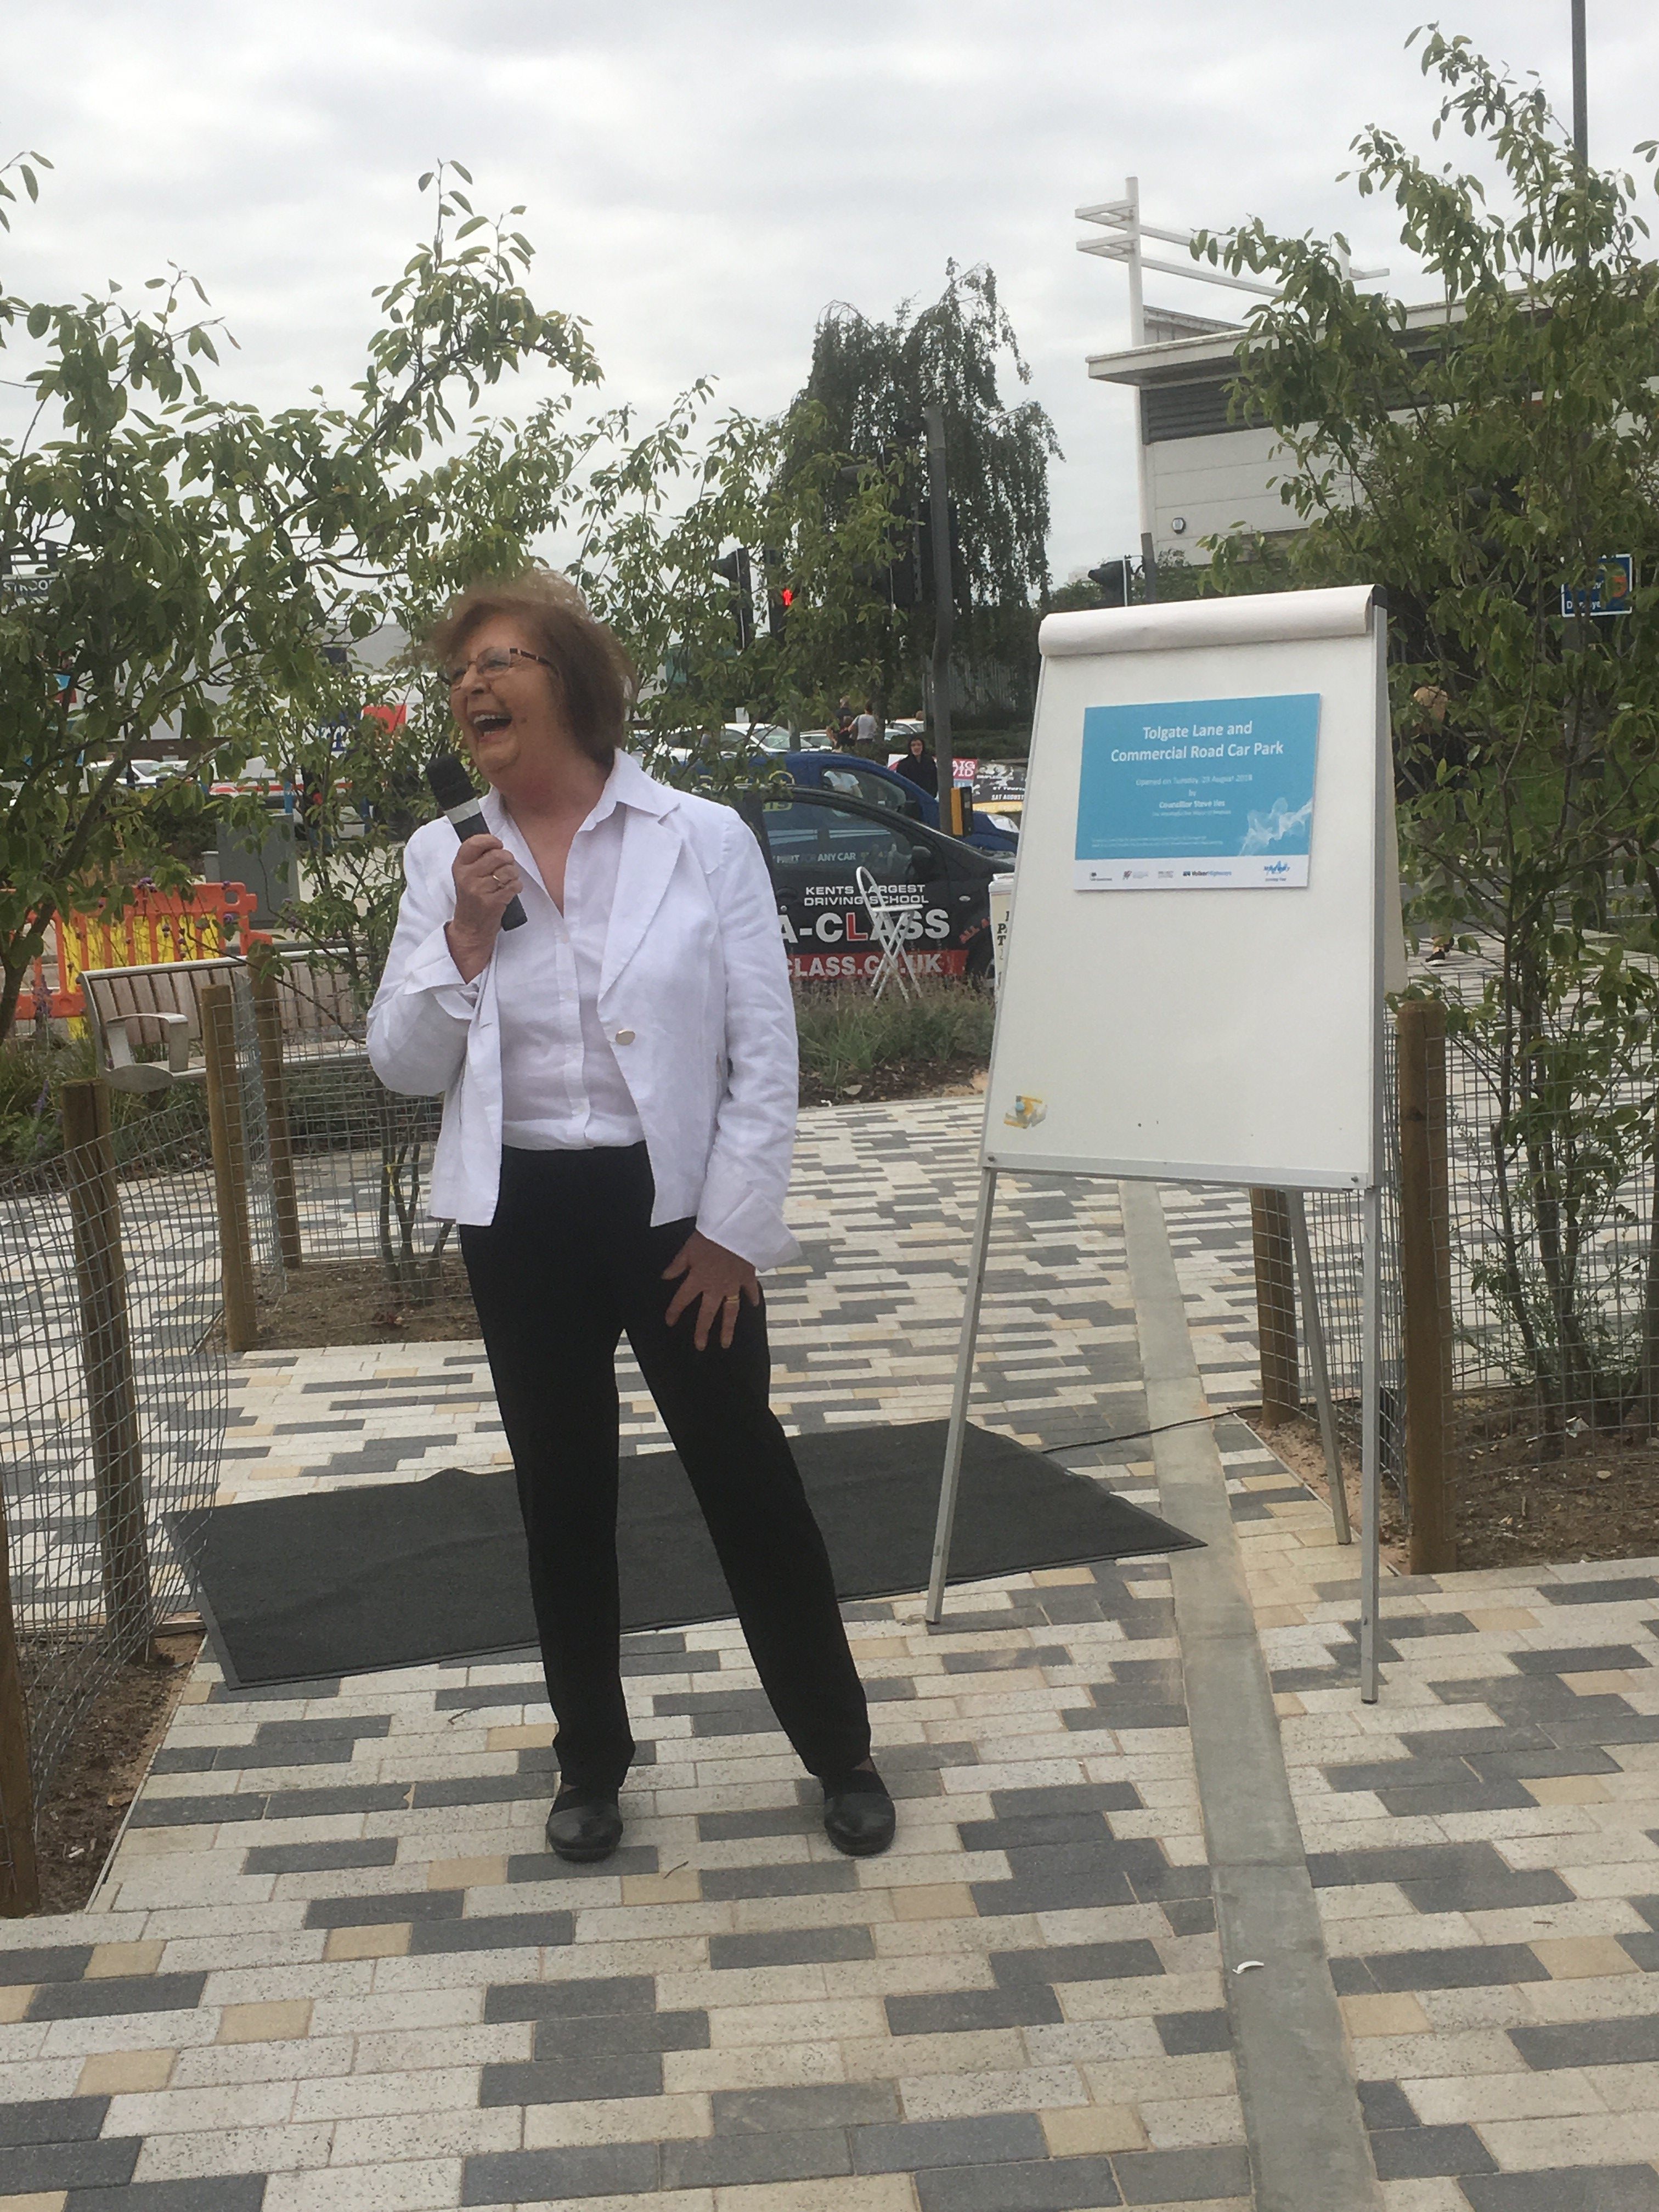 Local Councillor Jane Chitty welcomes the completion of works